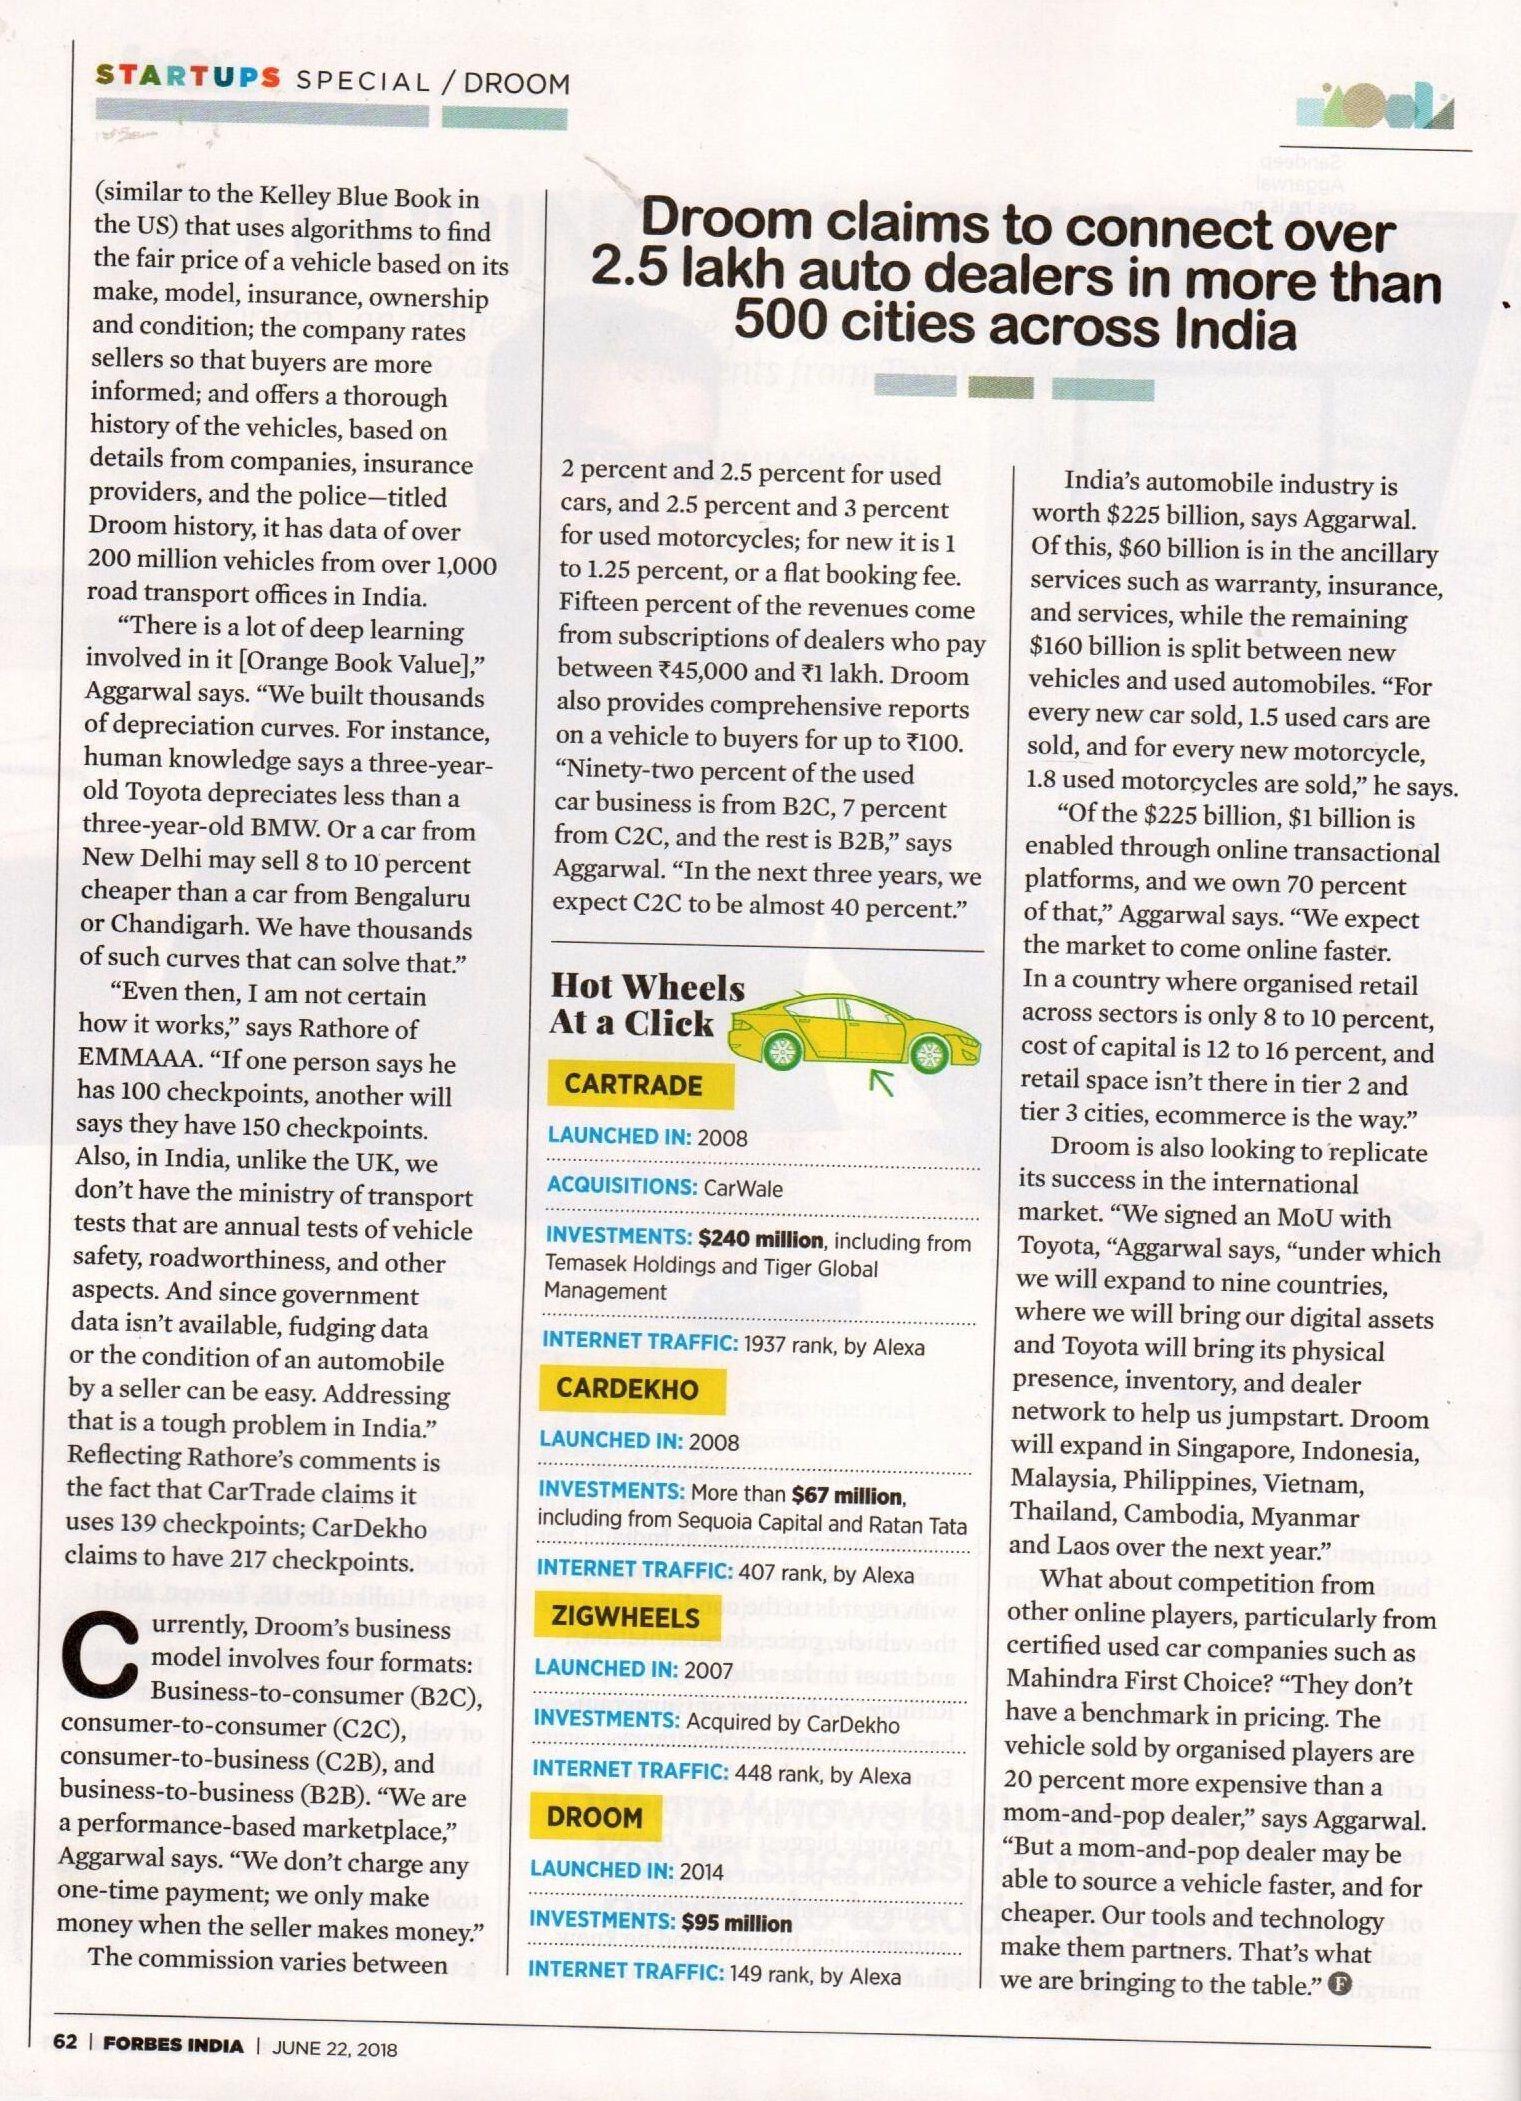 Forbes India | Droom in news